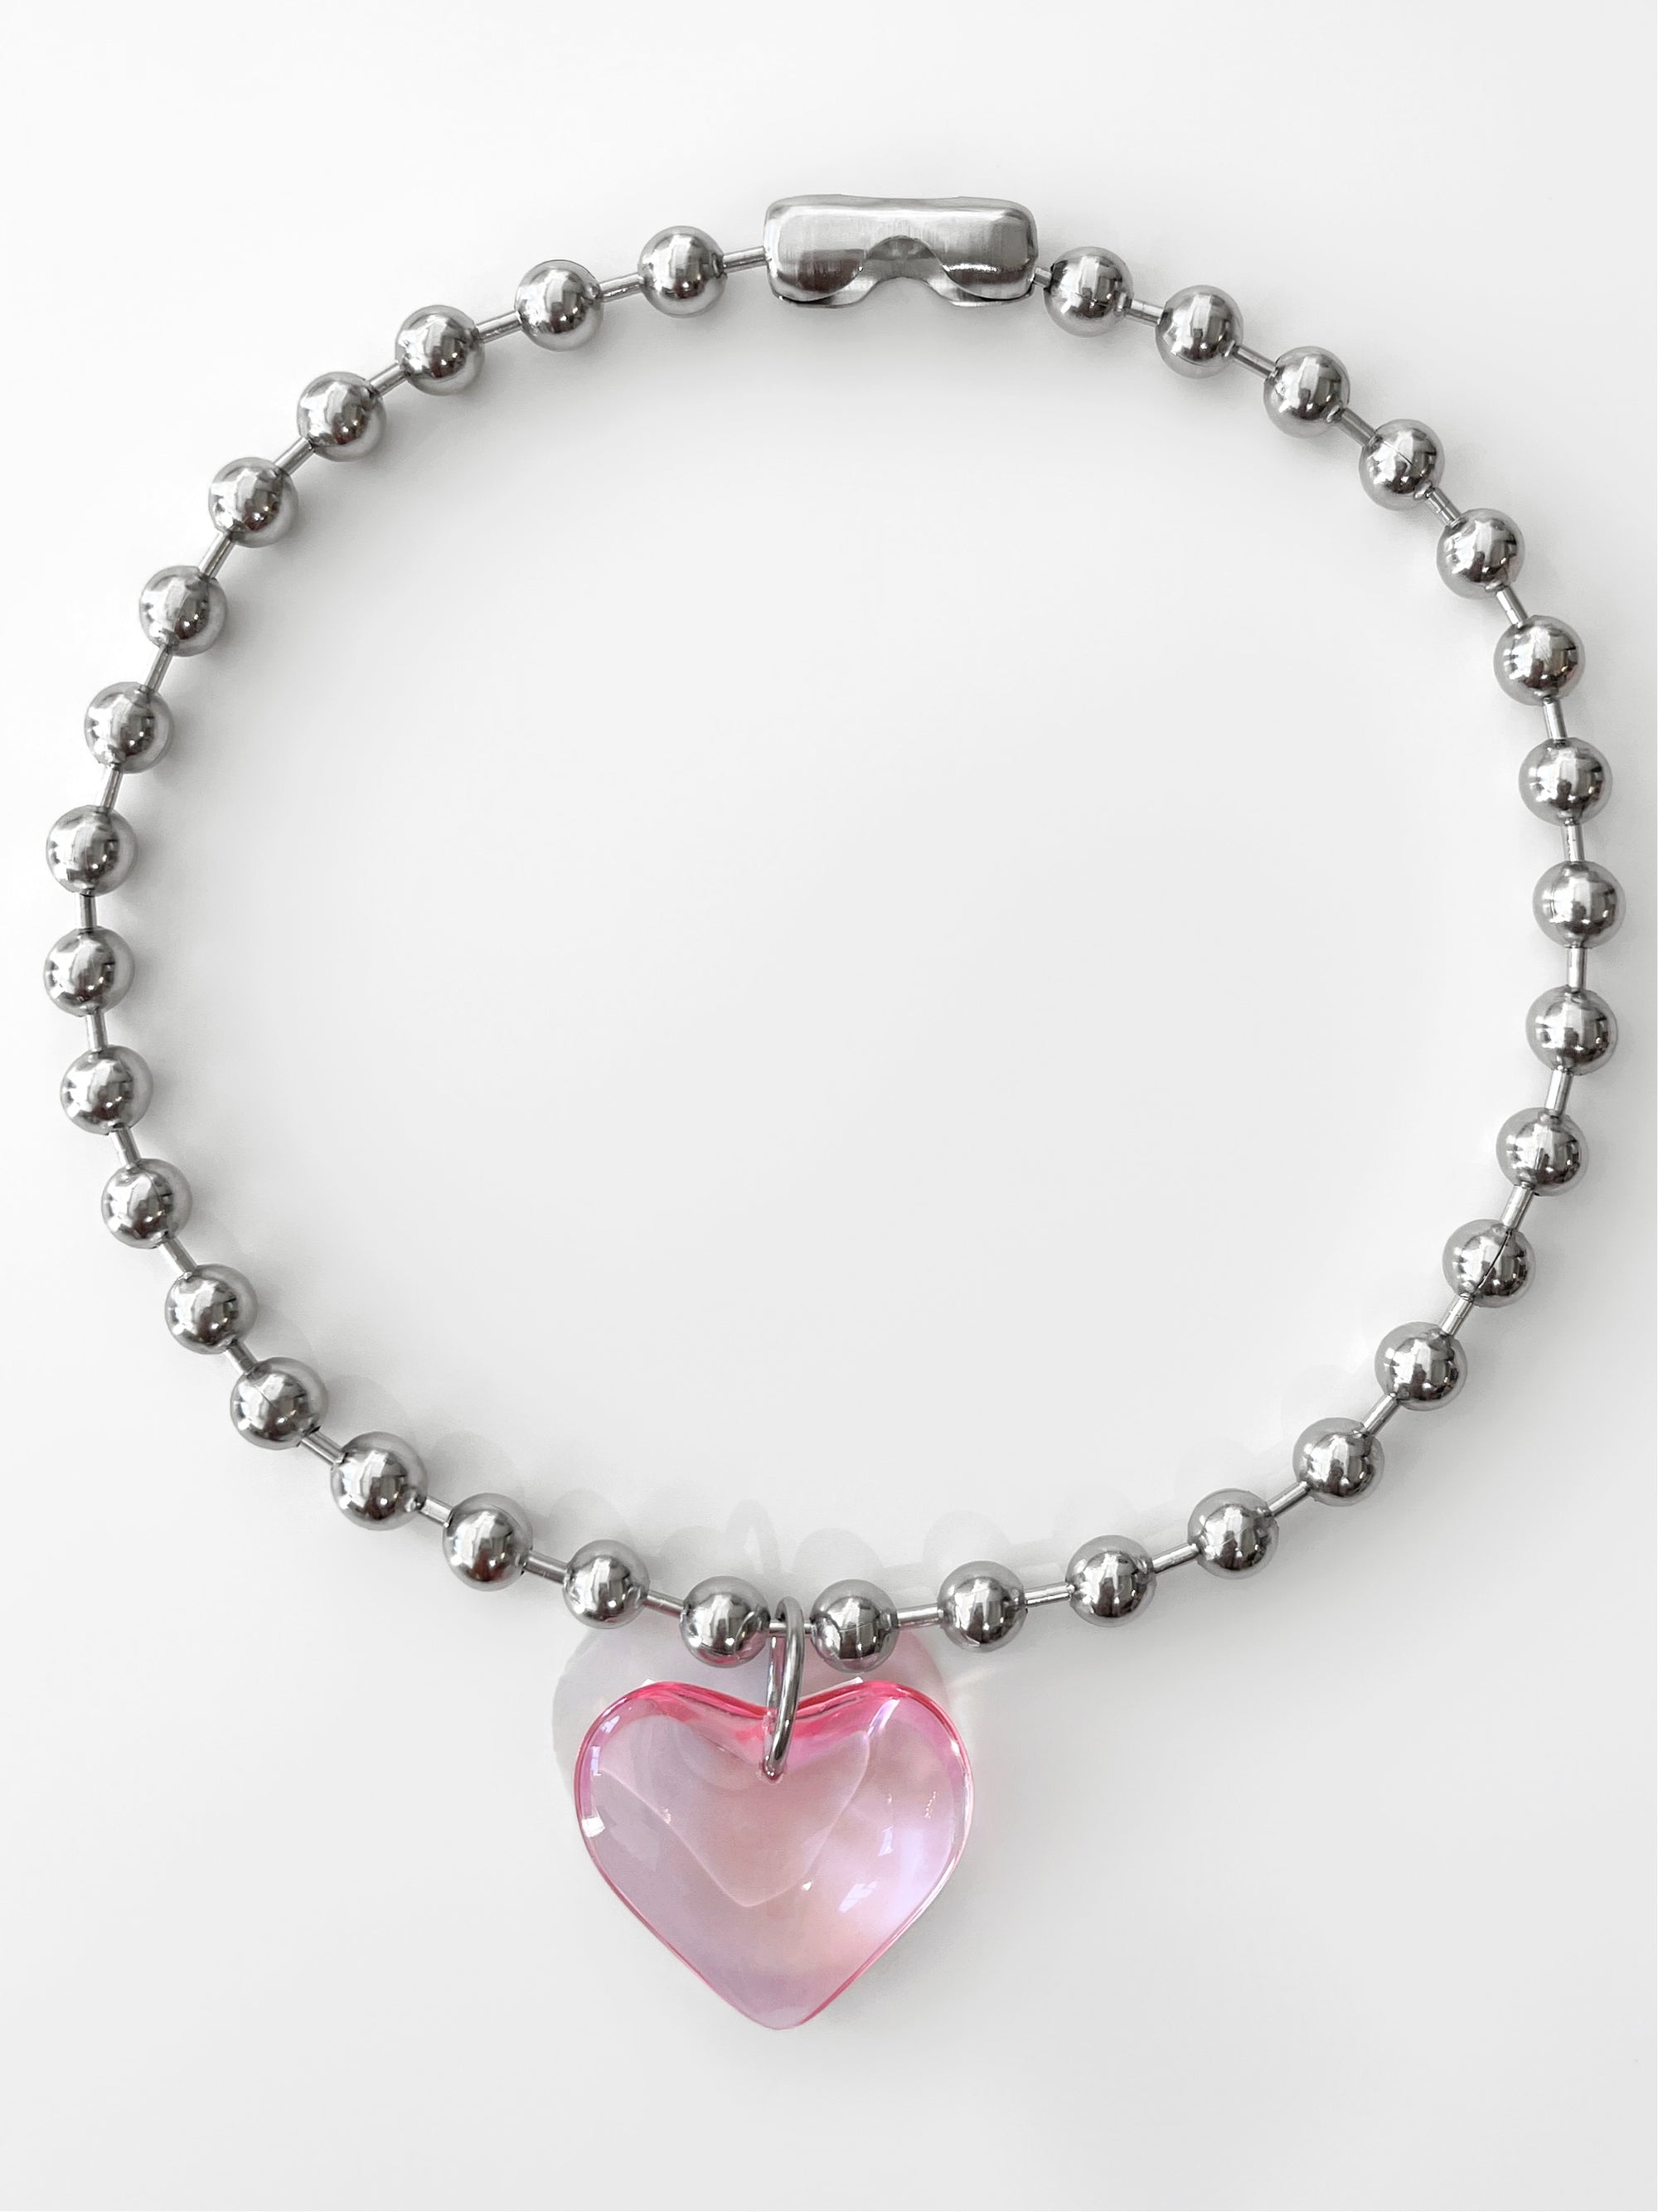 LIA HEART BALL CHAIN NECKLACE IN PINK